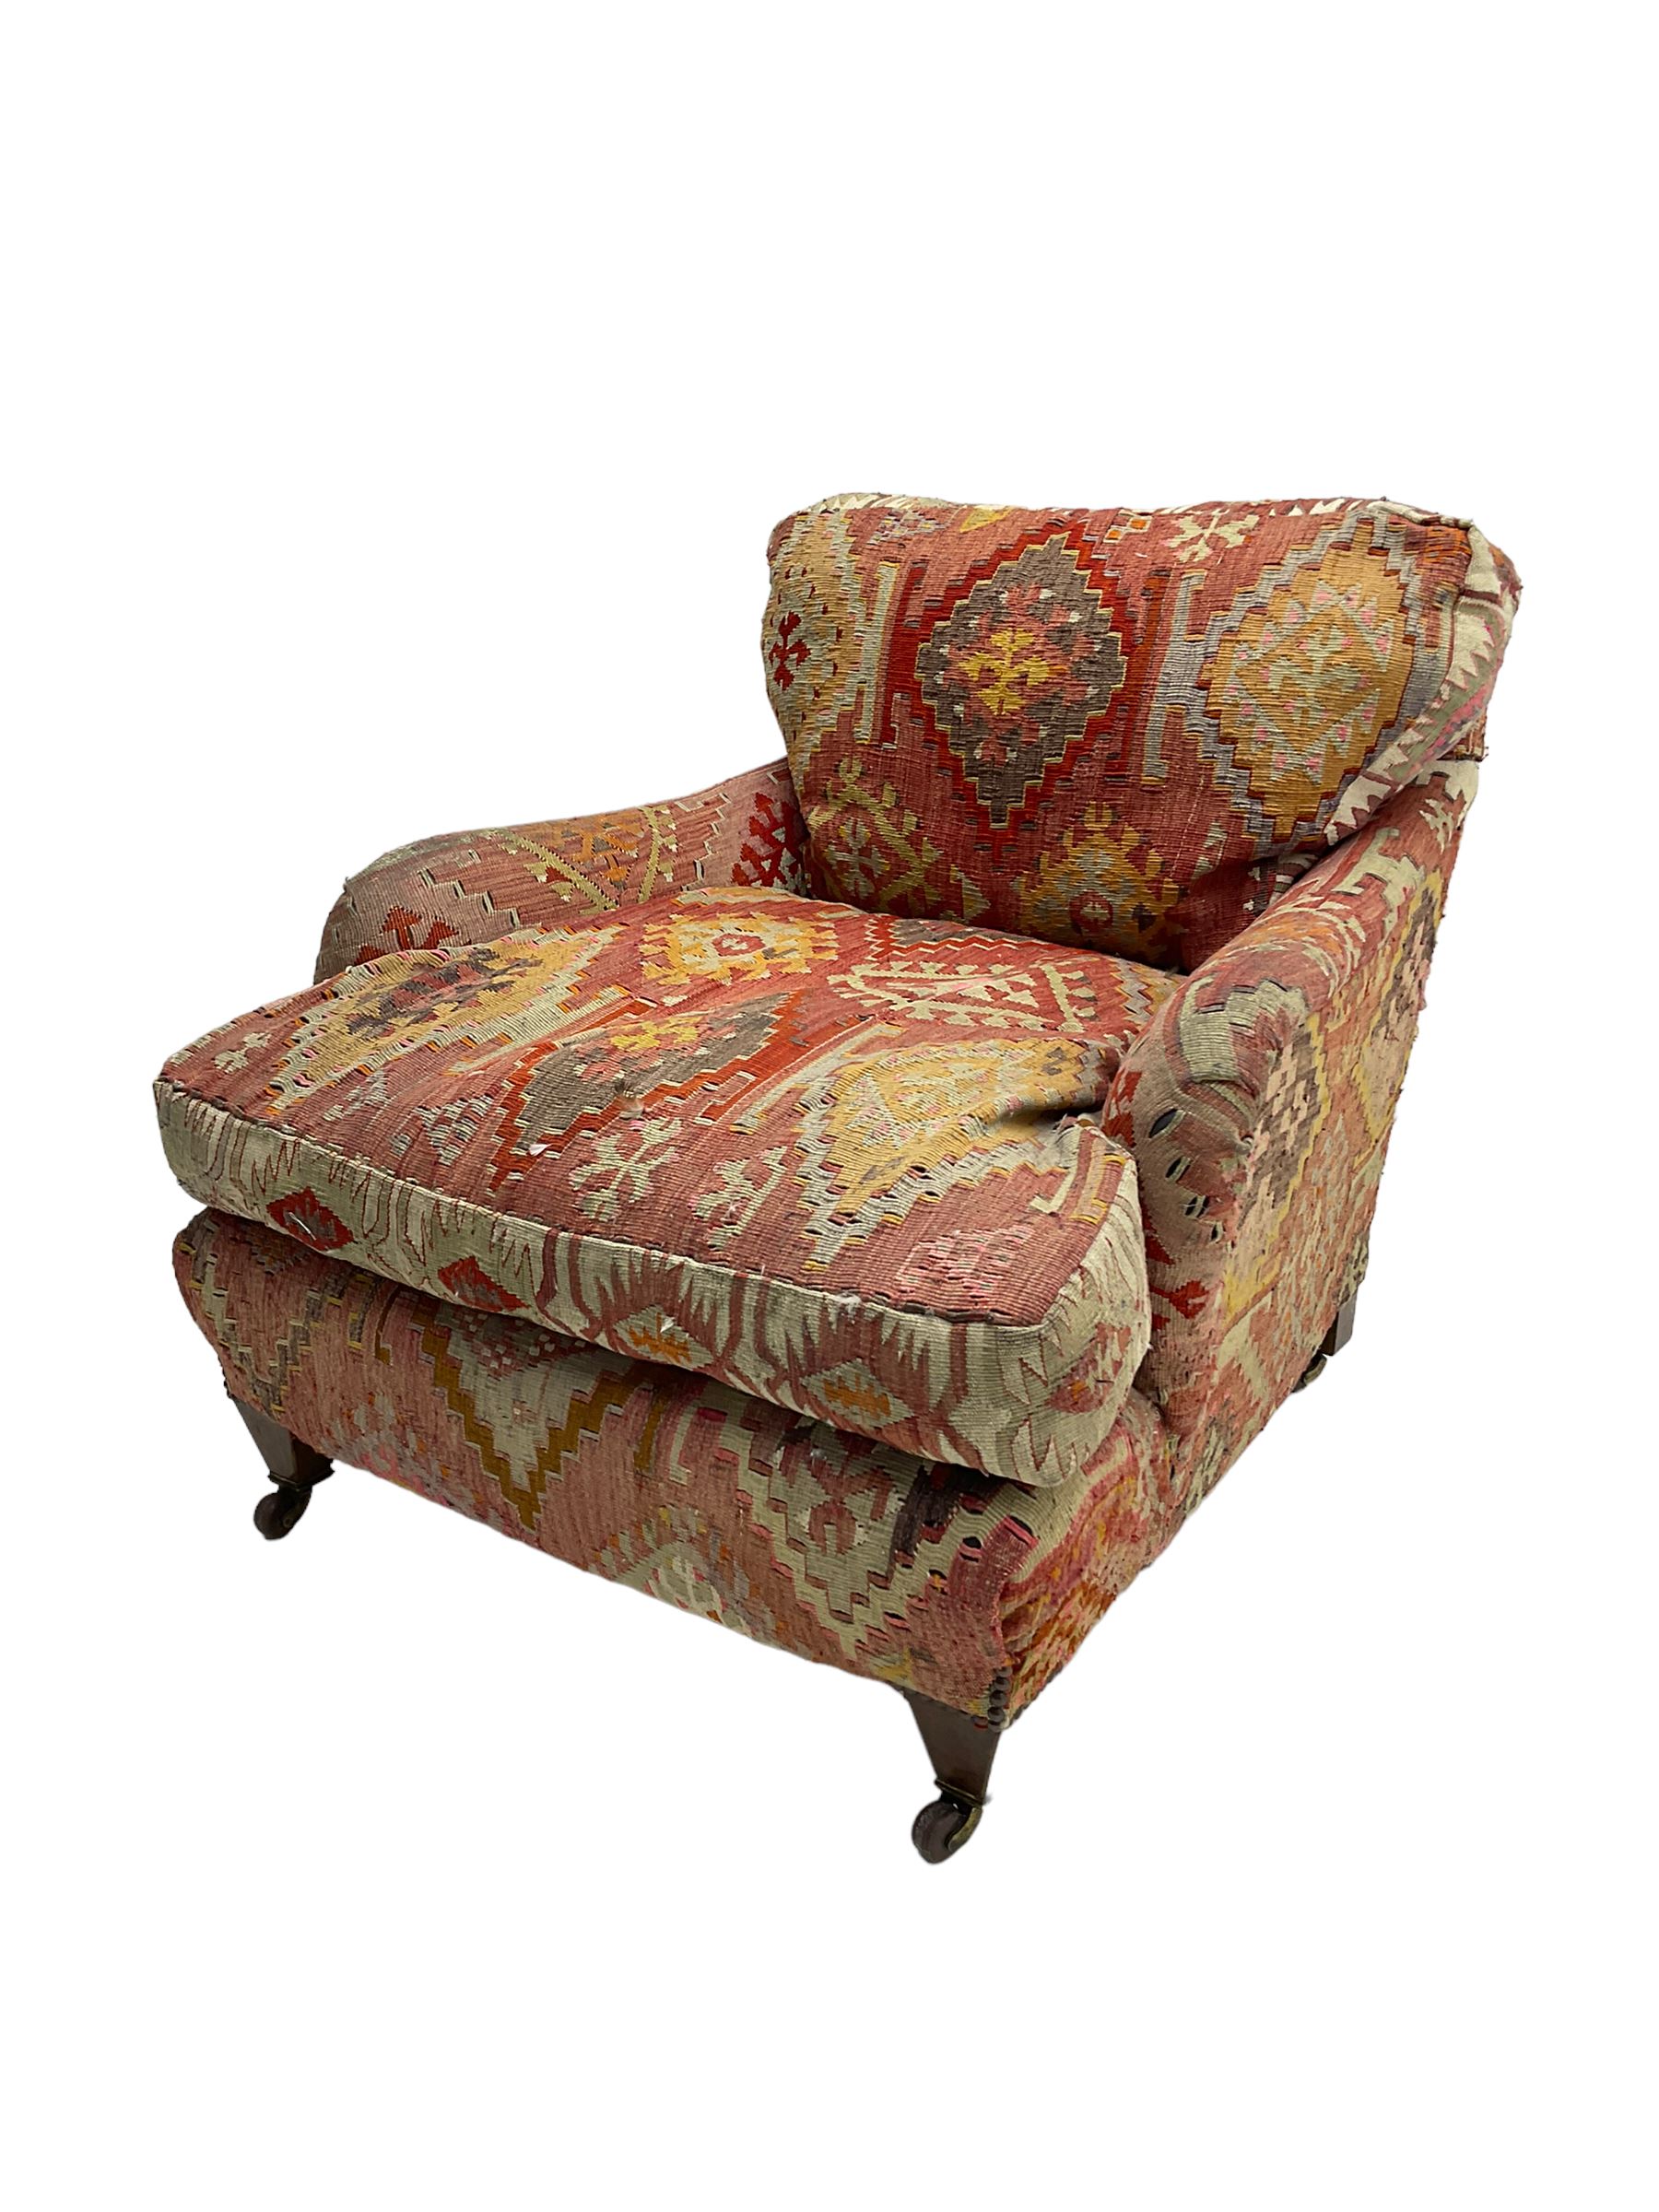 Early 20th century Howard style armchair - Image 3 of 5